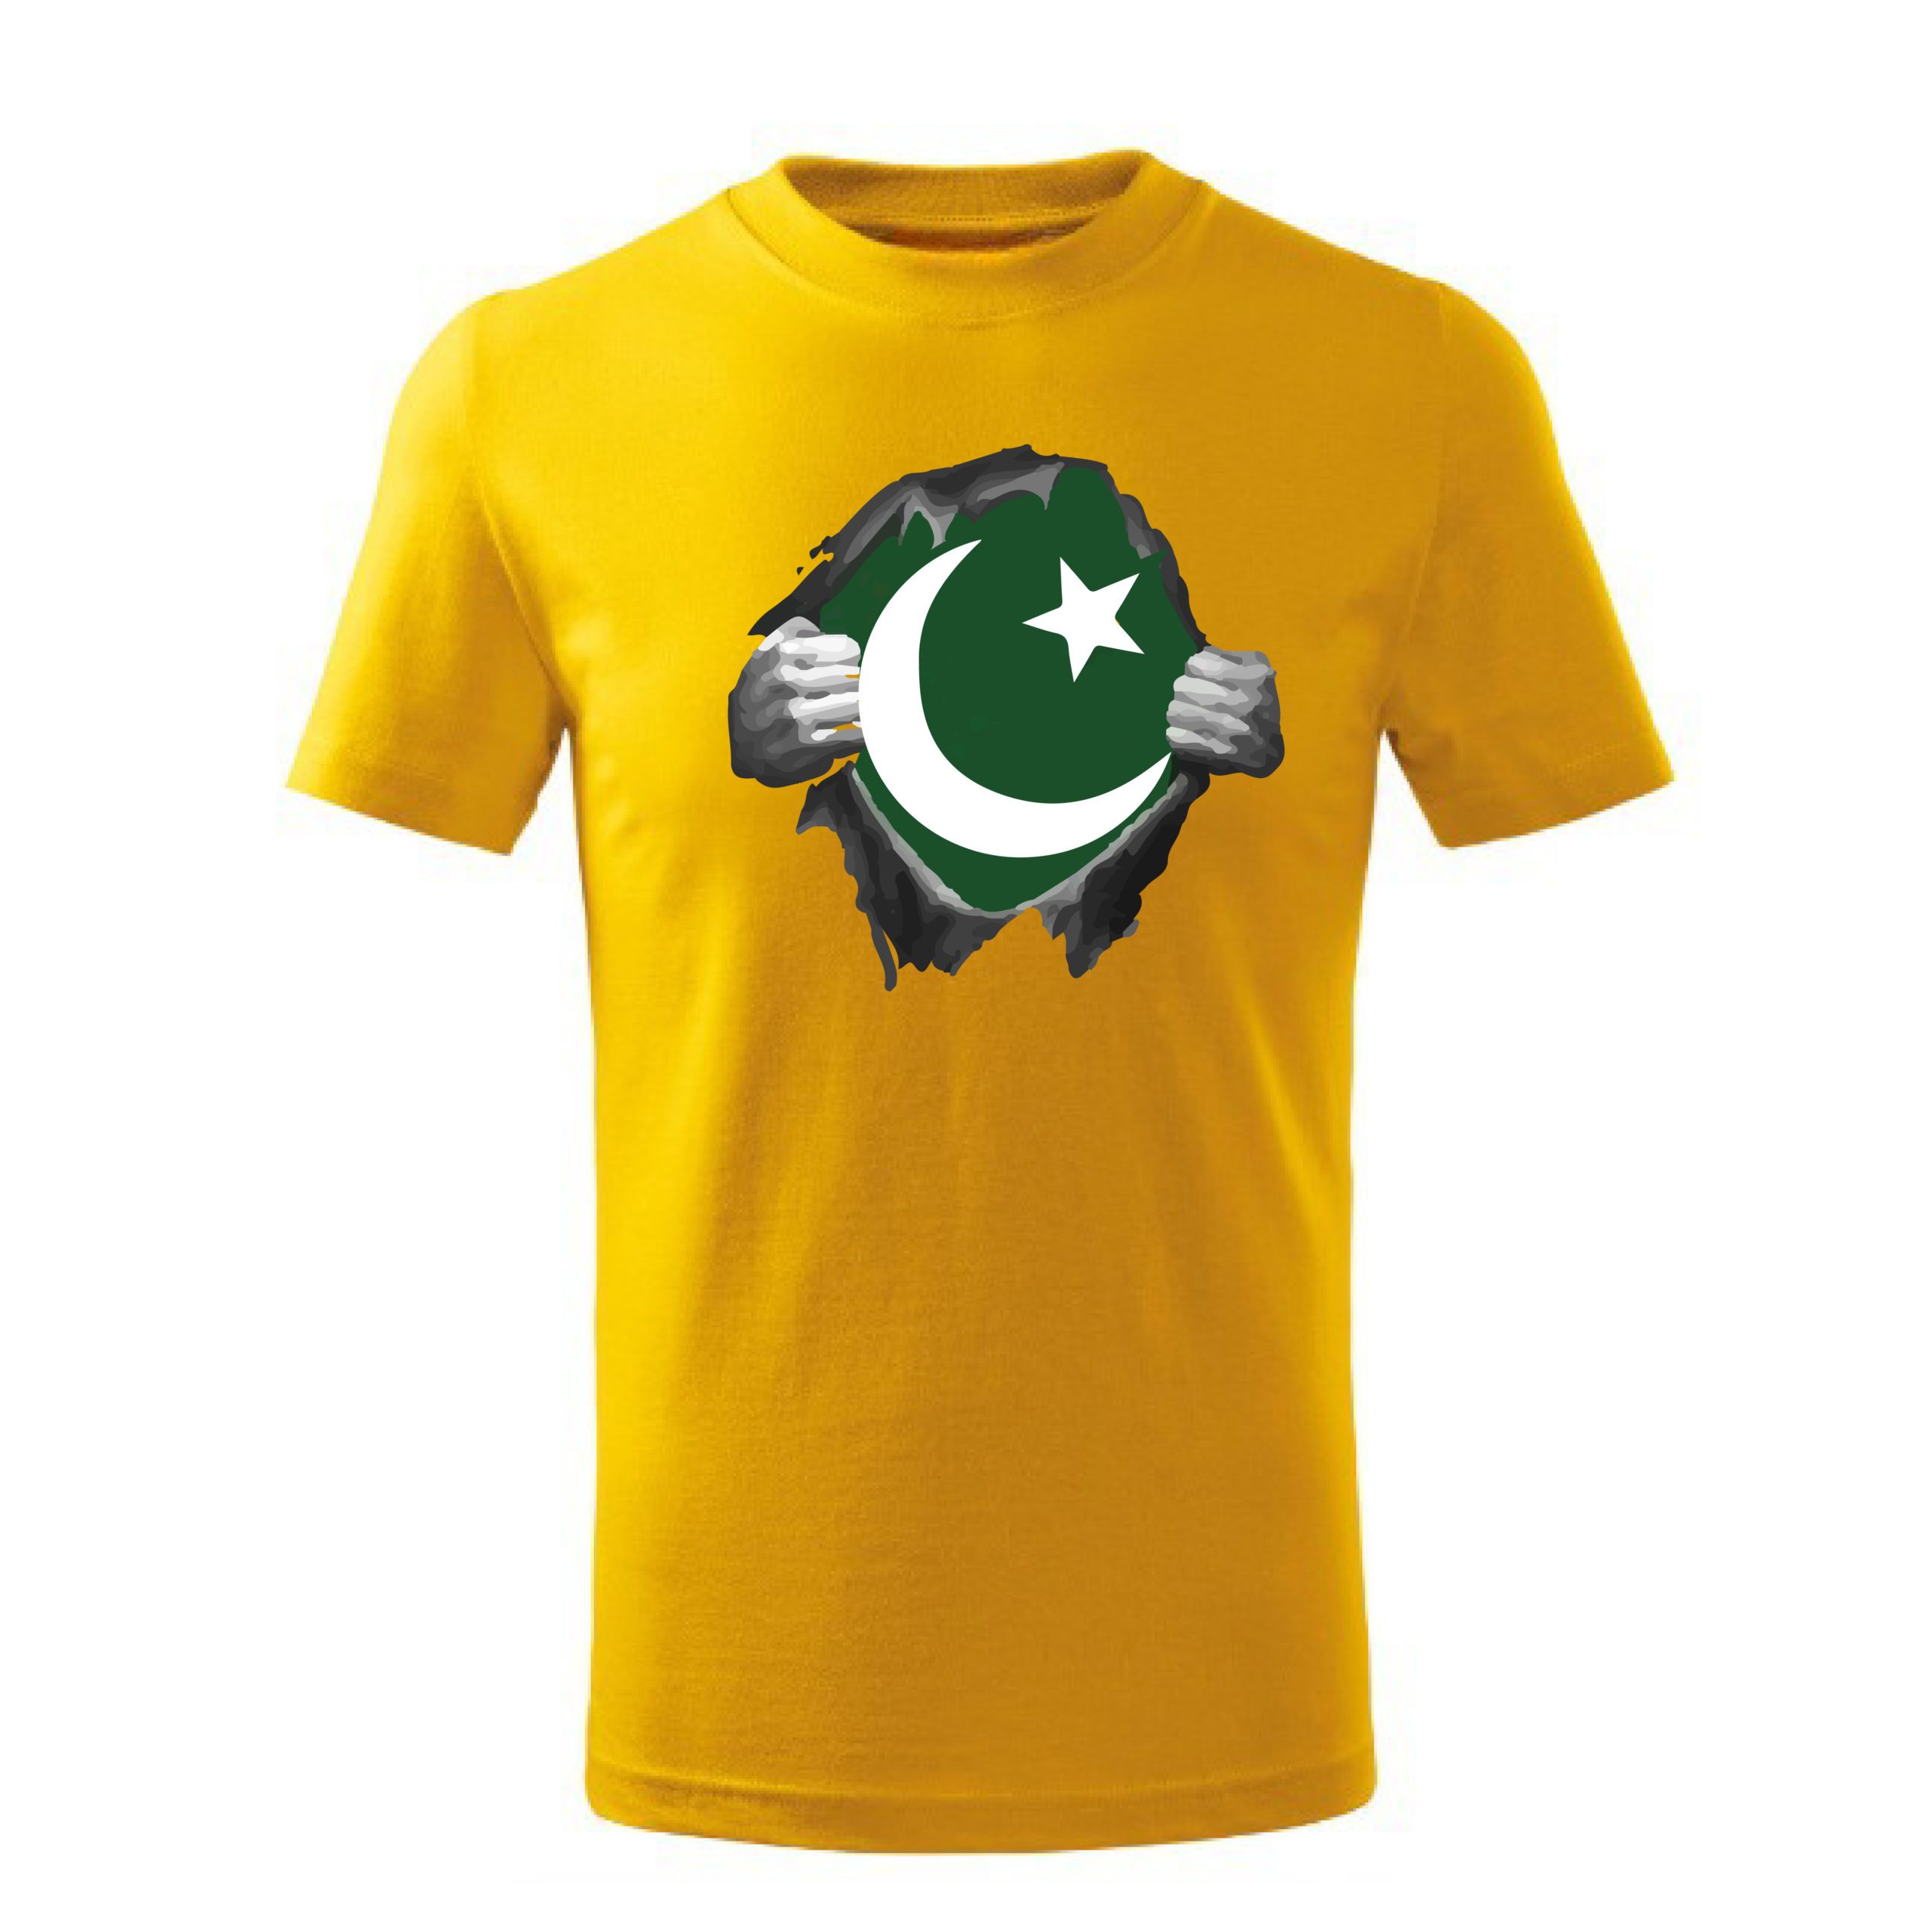 Pakistan Cricket World Fans T-shirts Supporting the Team Pakistan Jersey T-shirts For Men | Women to win the World Cup